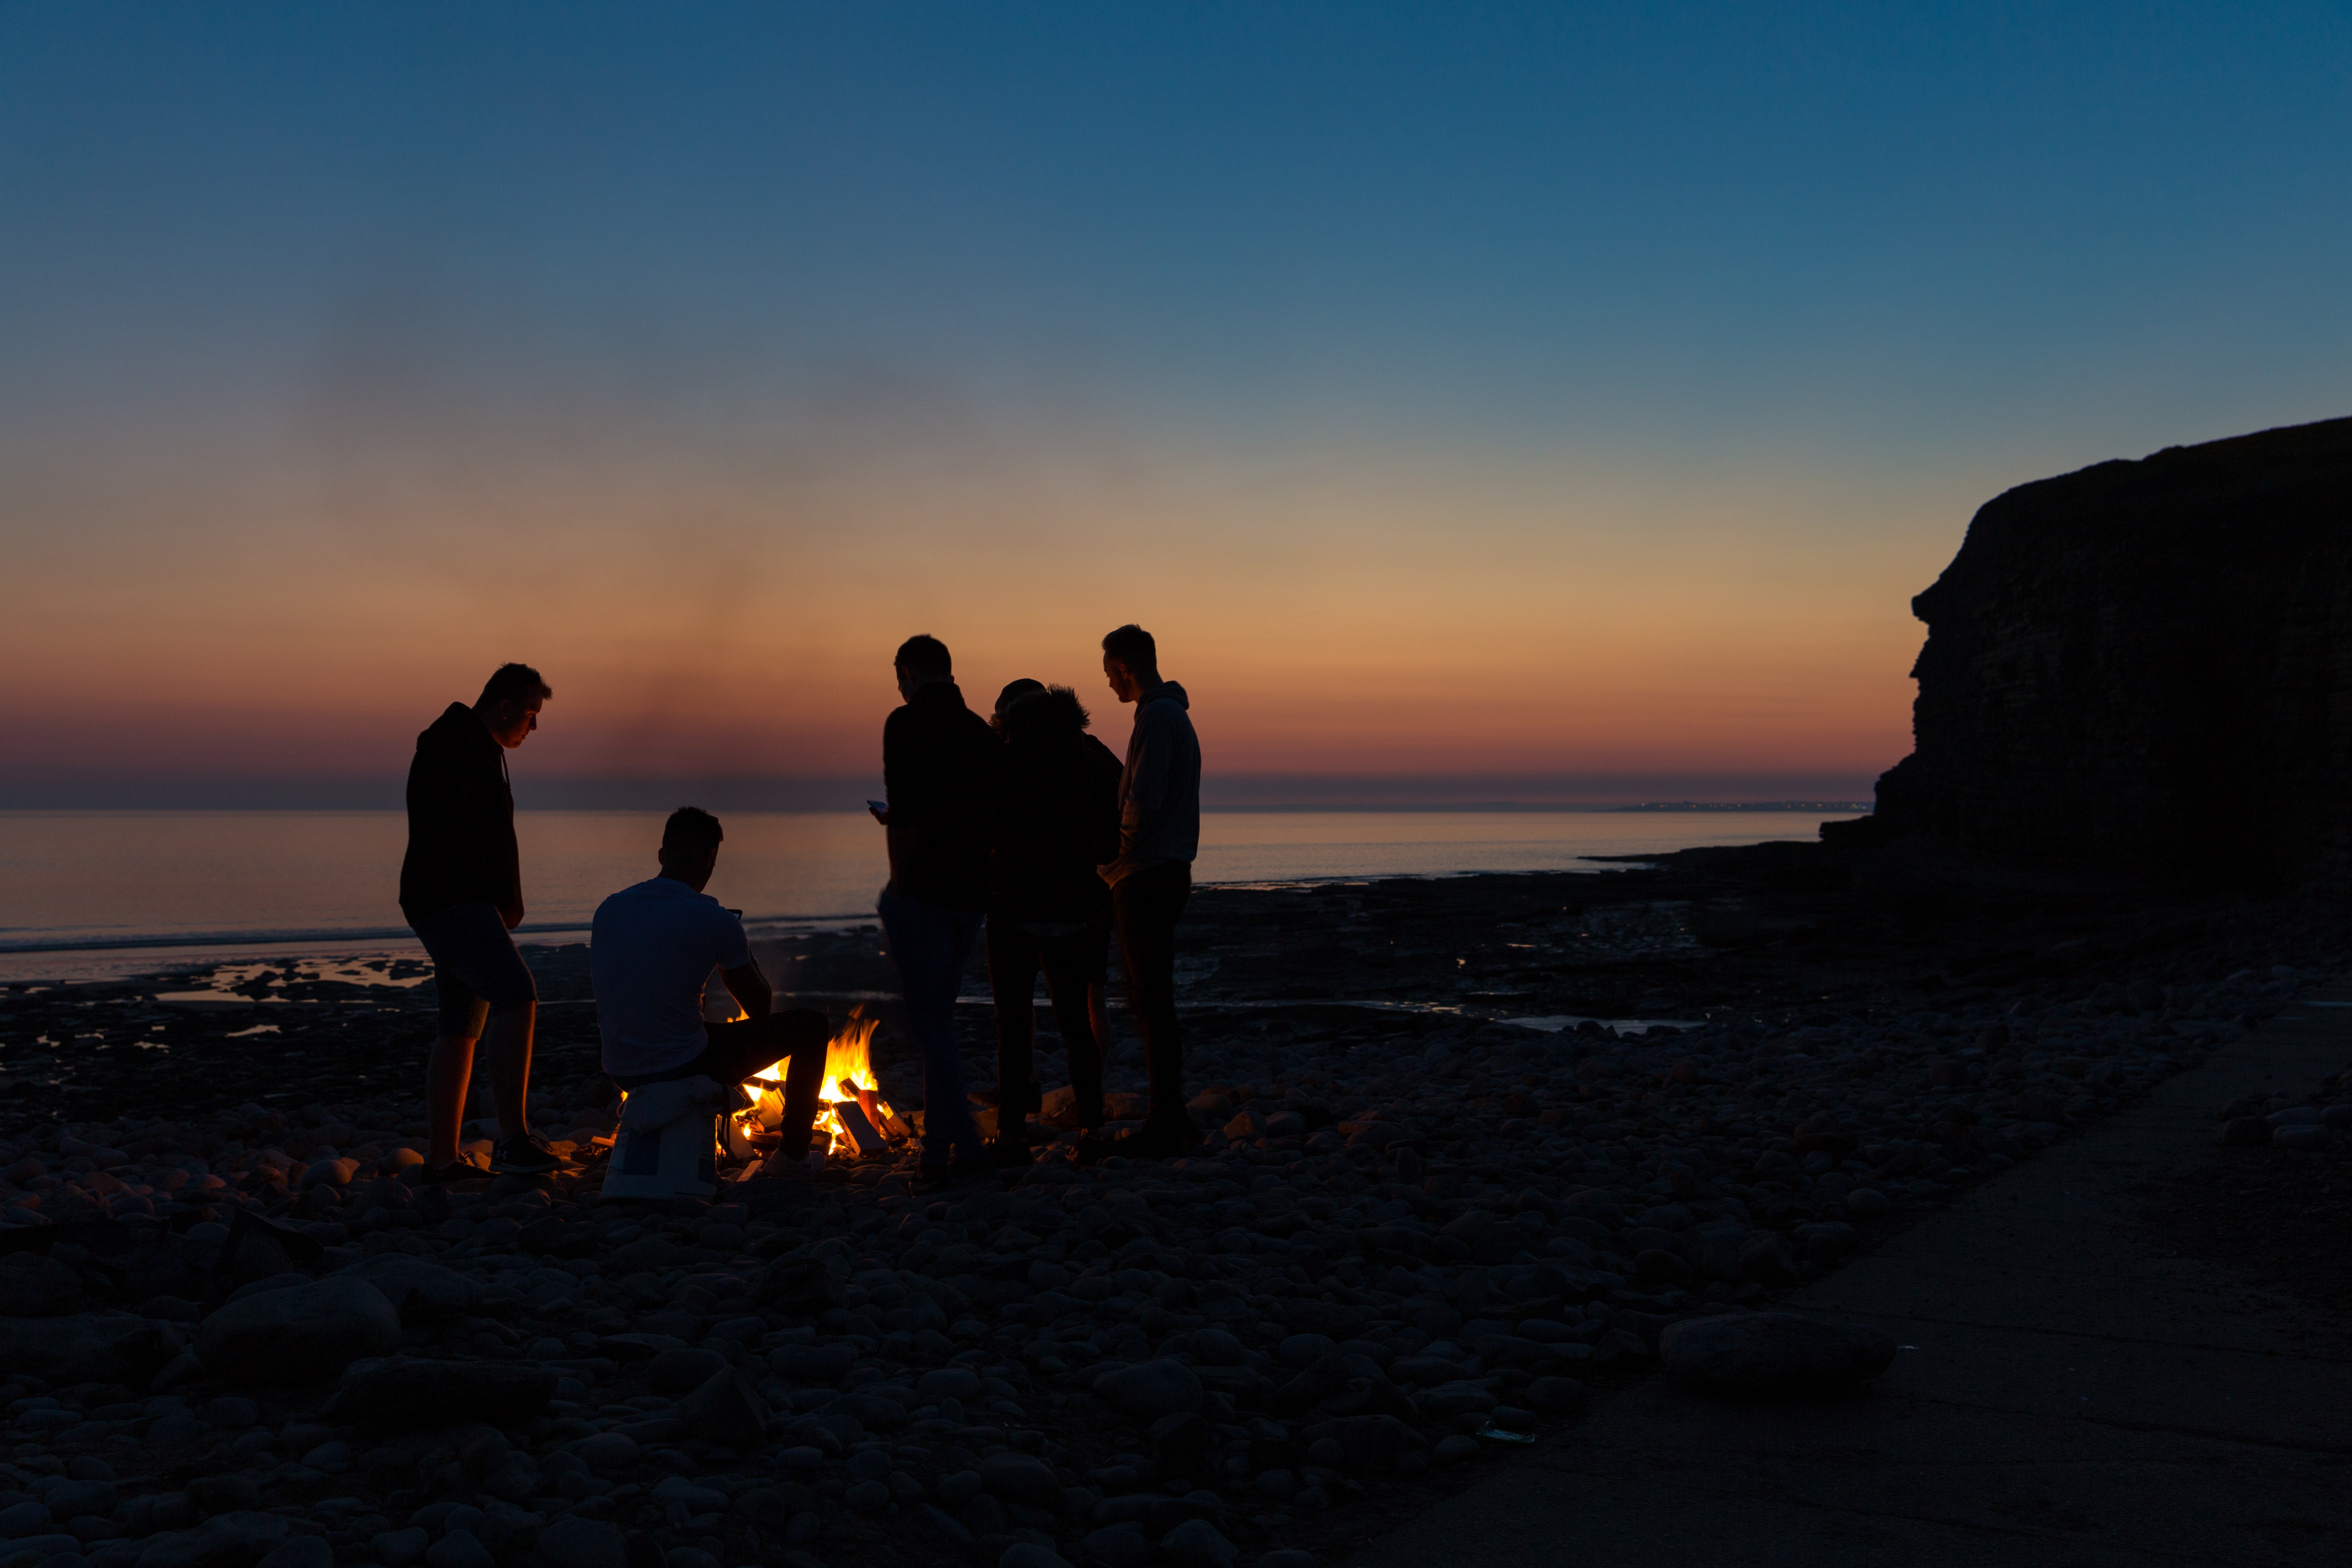 bonfire, beach, dark, silhouettes, relaxation, rest, camping, campsite